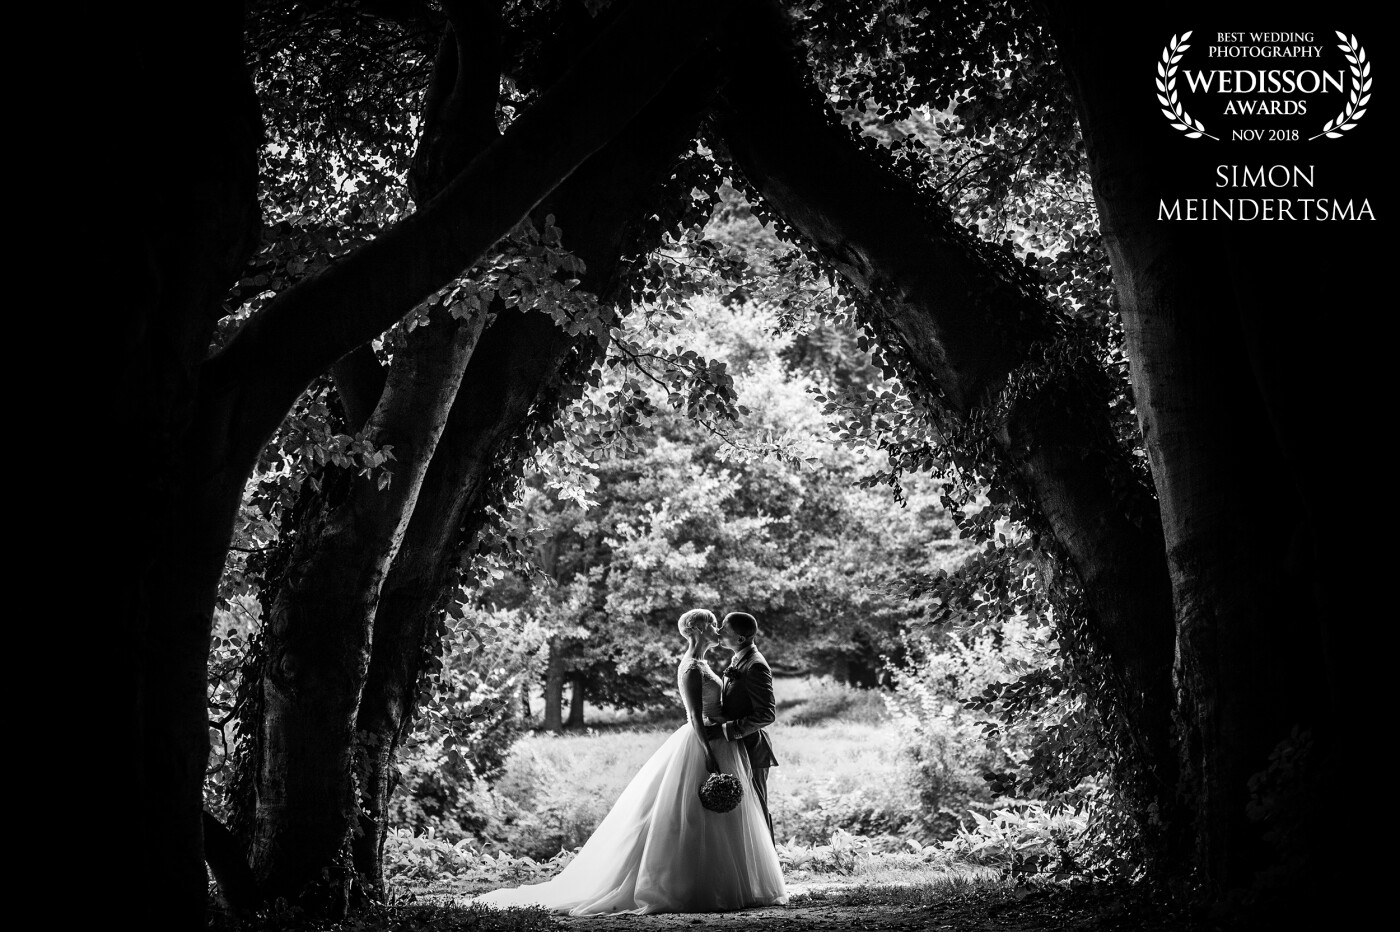 Amazing trees at a gorgeous venue these oak trees are the perfect setting for this image, the love this couple has is just amazing!